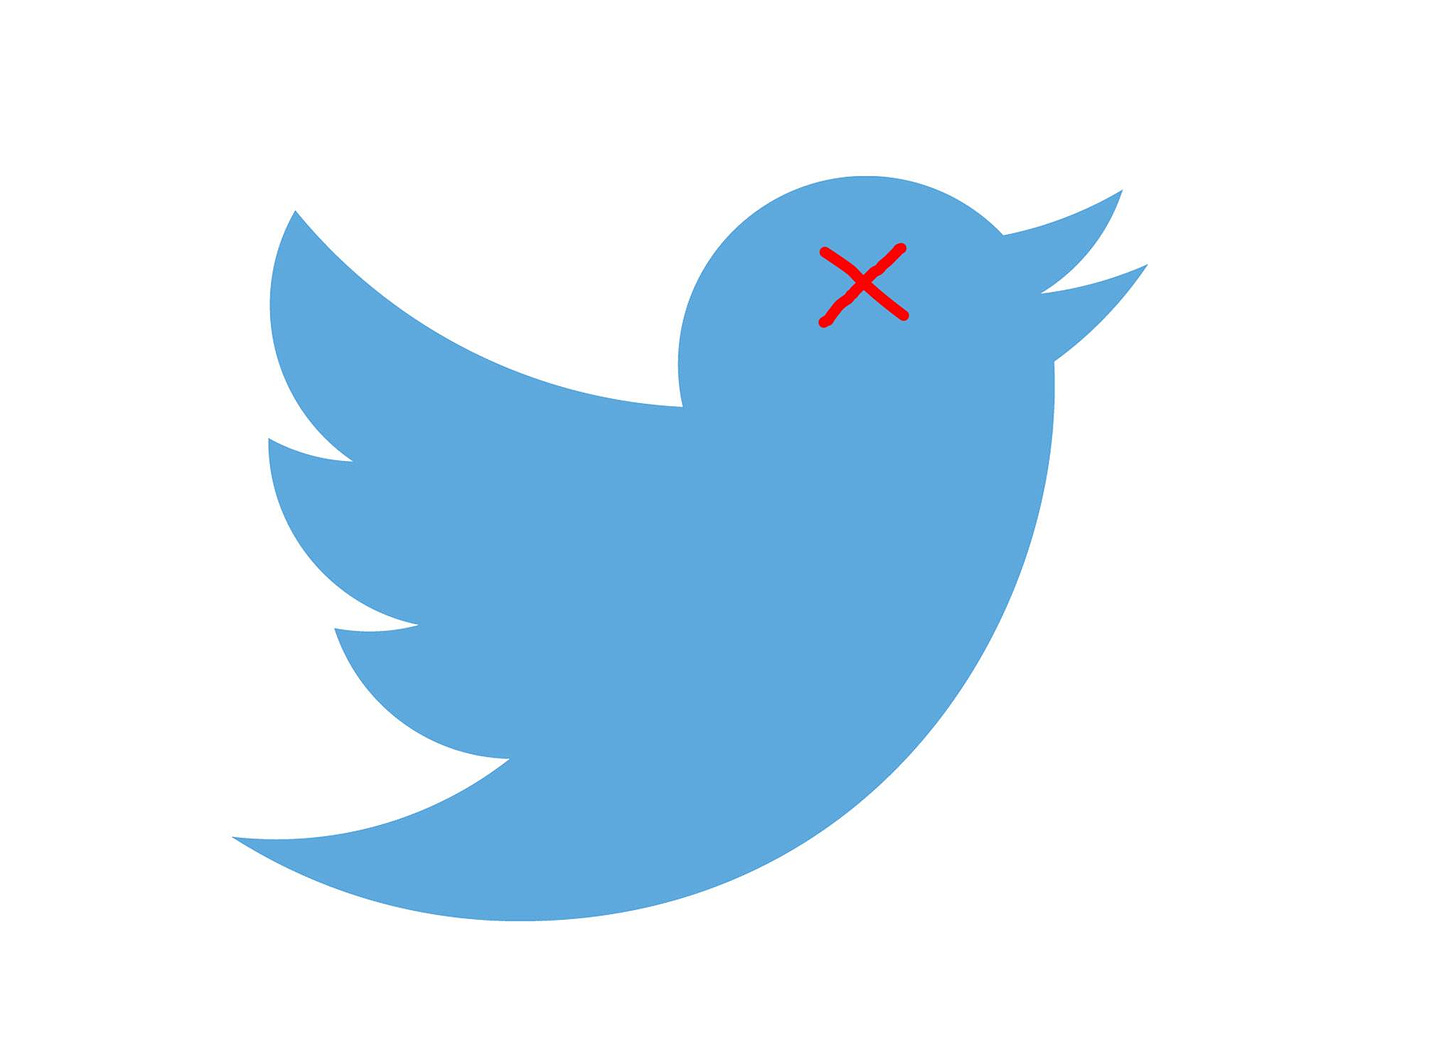 Twitter logo with red x on eye